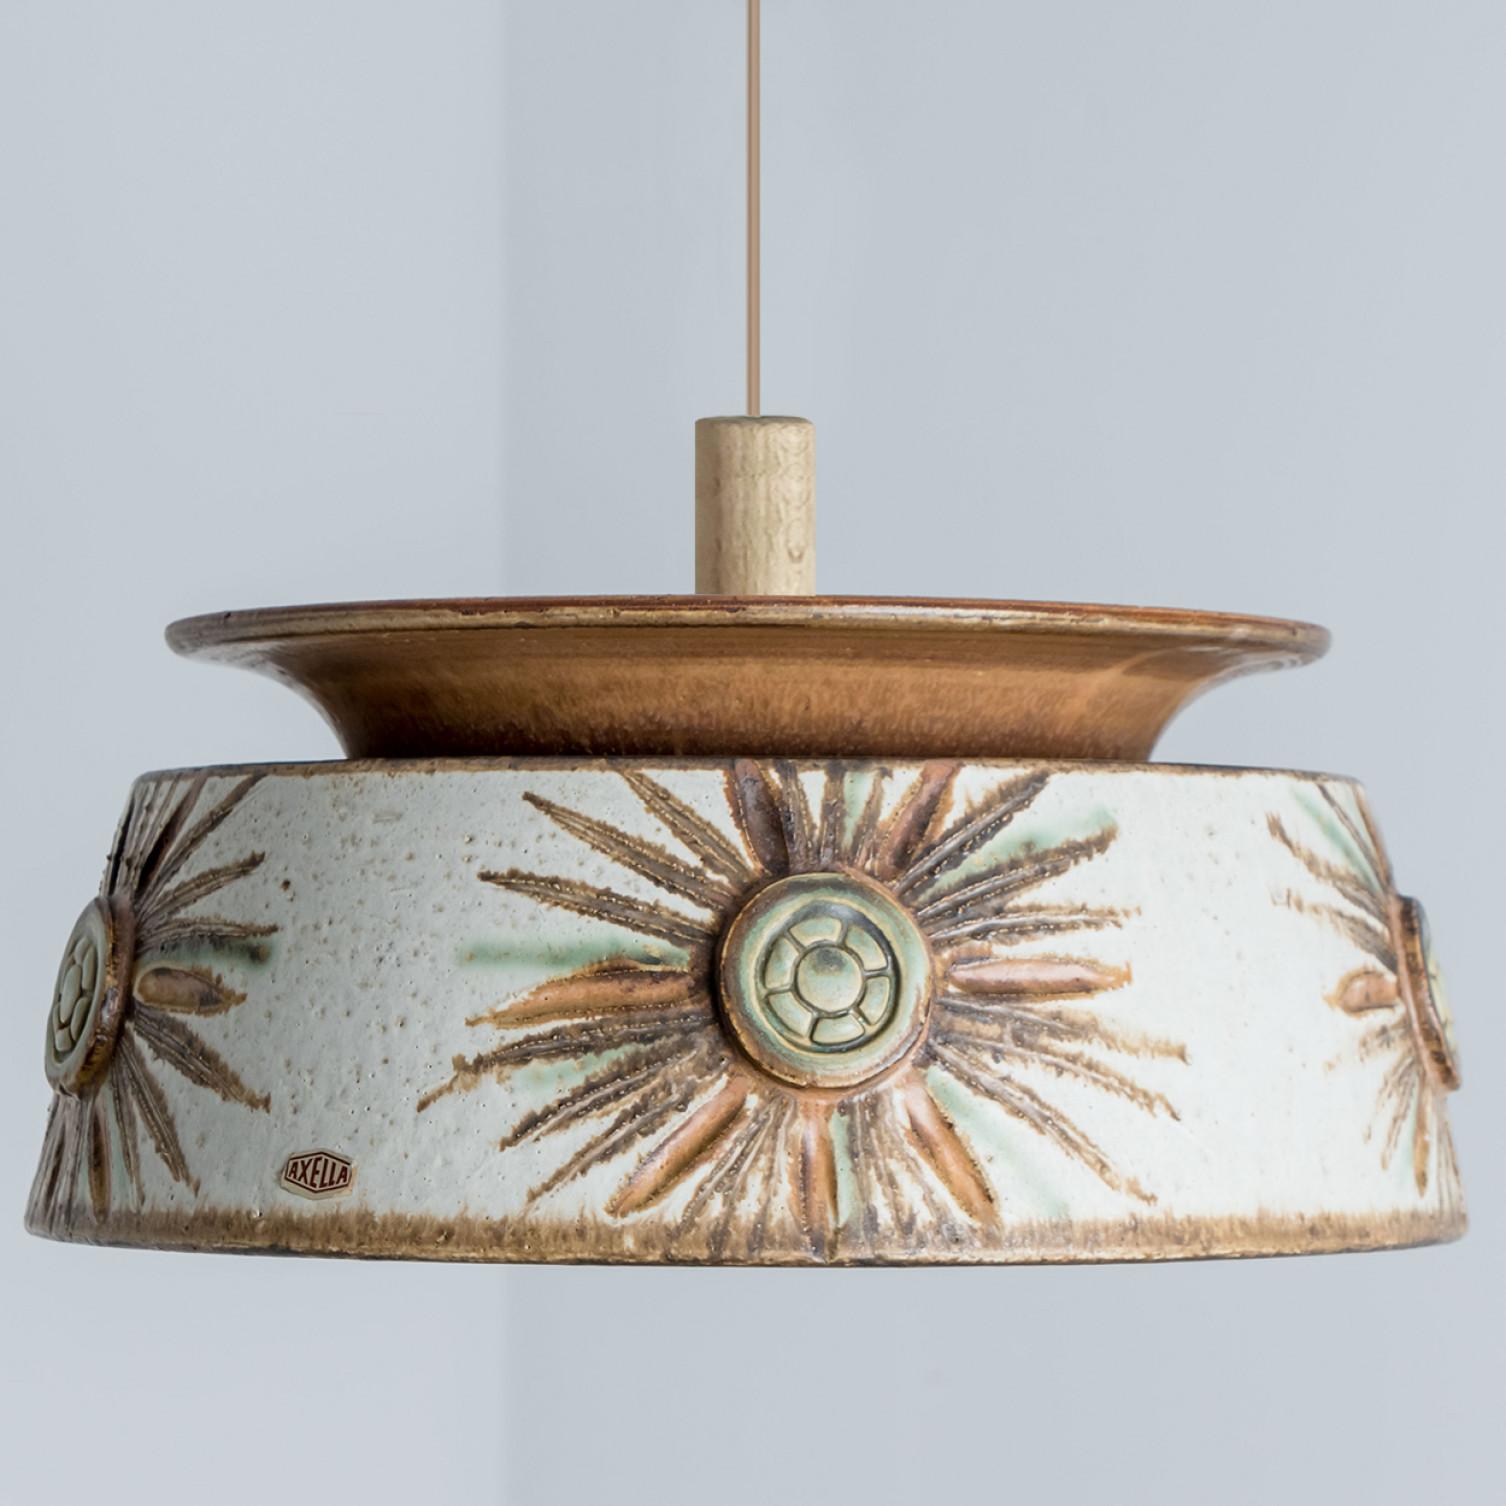 Stunning round hanging lamp with an unusual shape, made with rich brown and light blue colored ceramics, manufactured in the 1970s in Denmark. We also have a multitude of unique colored ceramic light sets and arrangements, all available on the